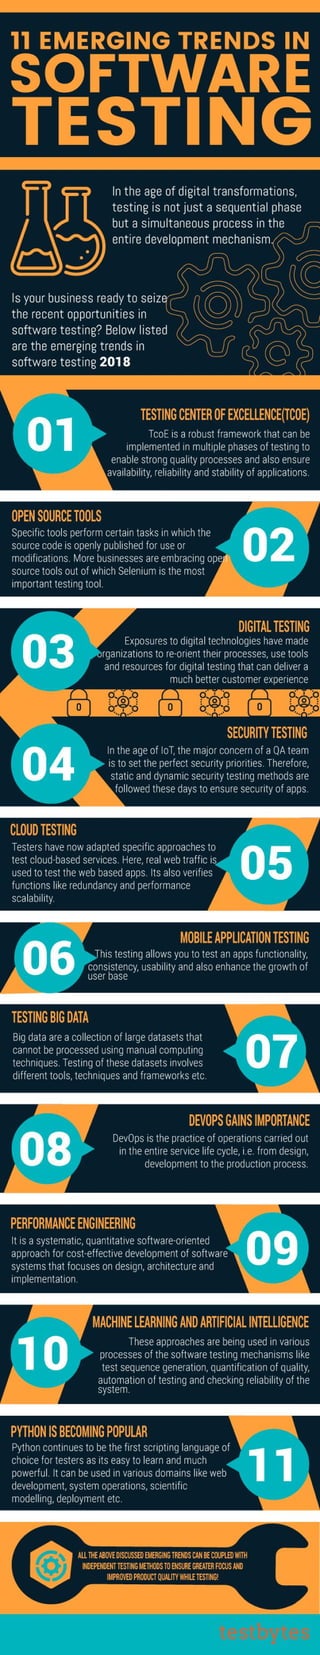 11 Emerging Trends in Software Testing 2018 [Infographic]